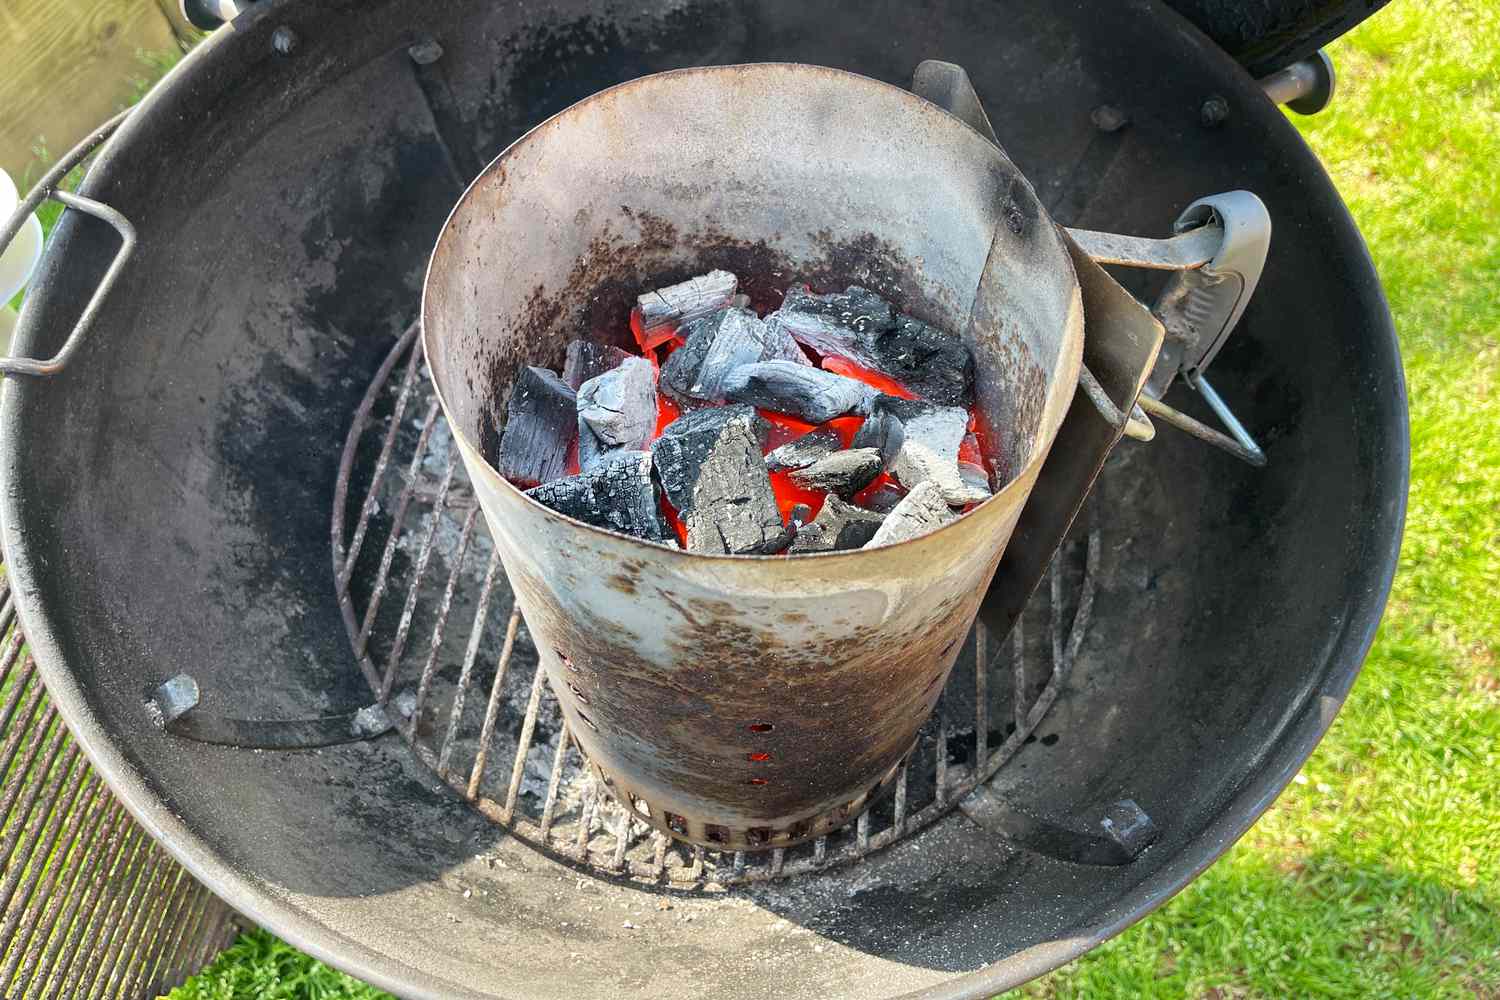 Big Green Egg Natural Oak and Hickory Lump Charcoal burning in a grill